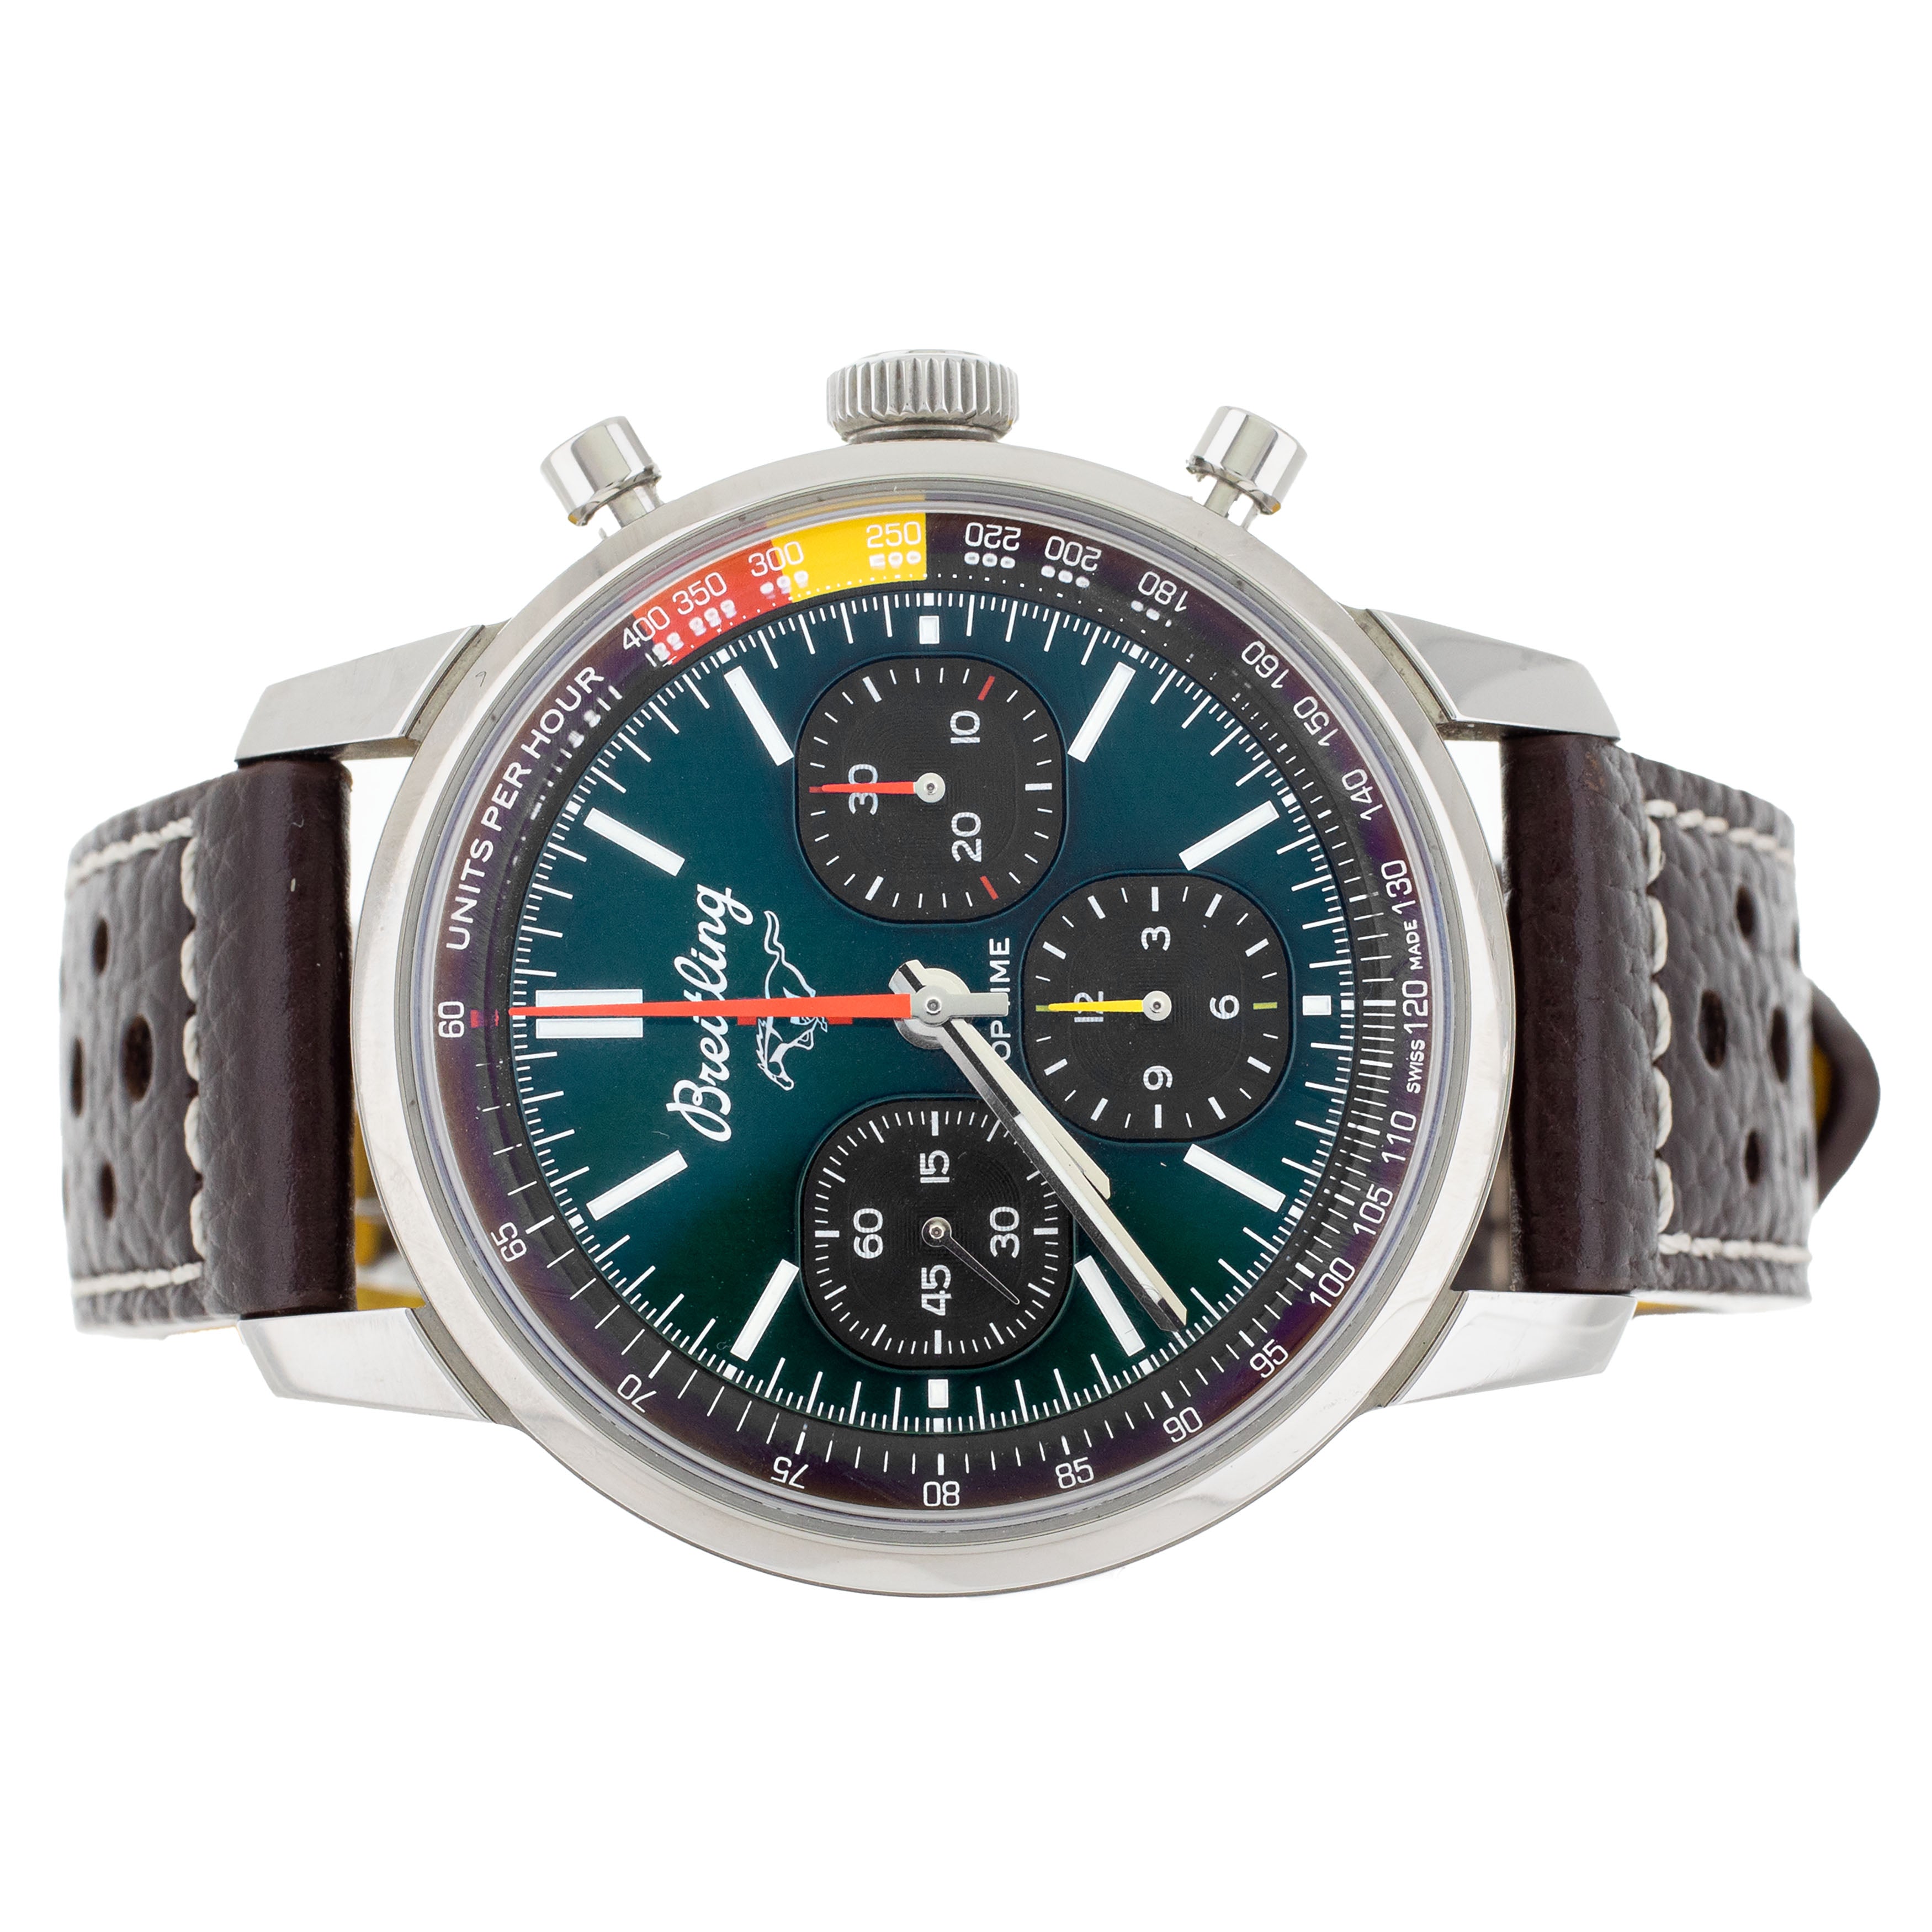 Breitling Top Time Mustang Stainless Steel Green Dial 41mm AB0176 Full Set